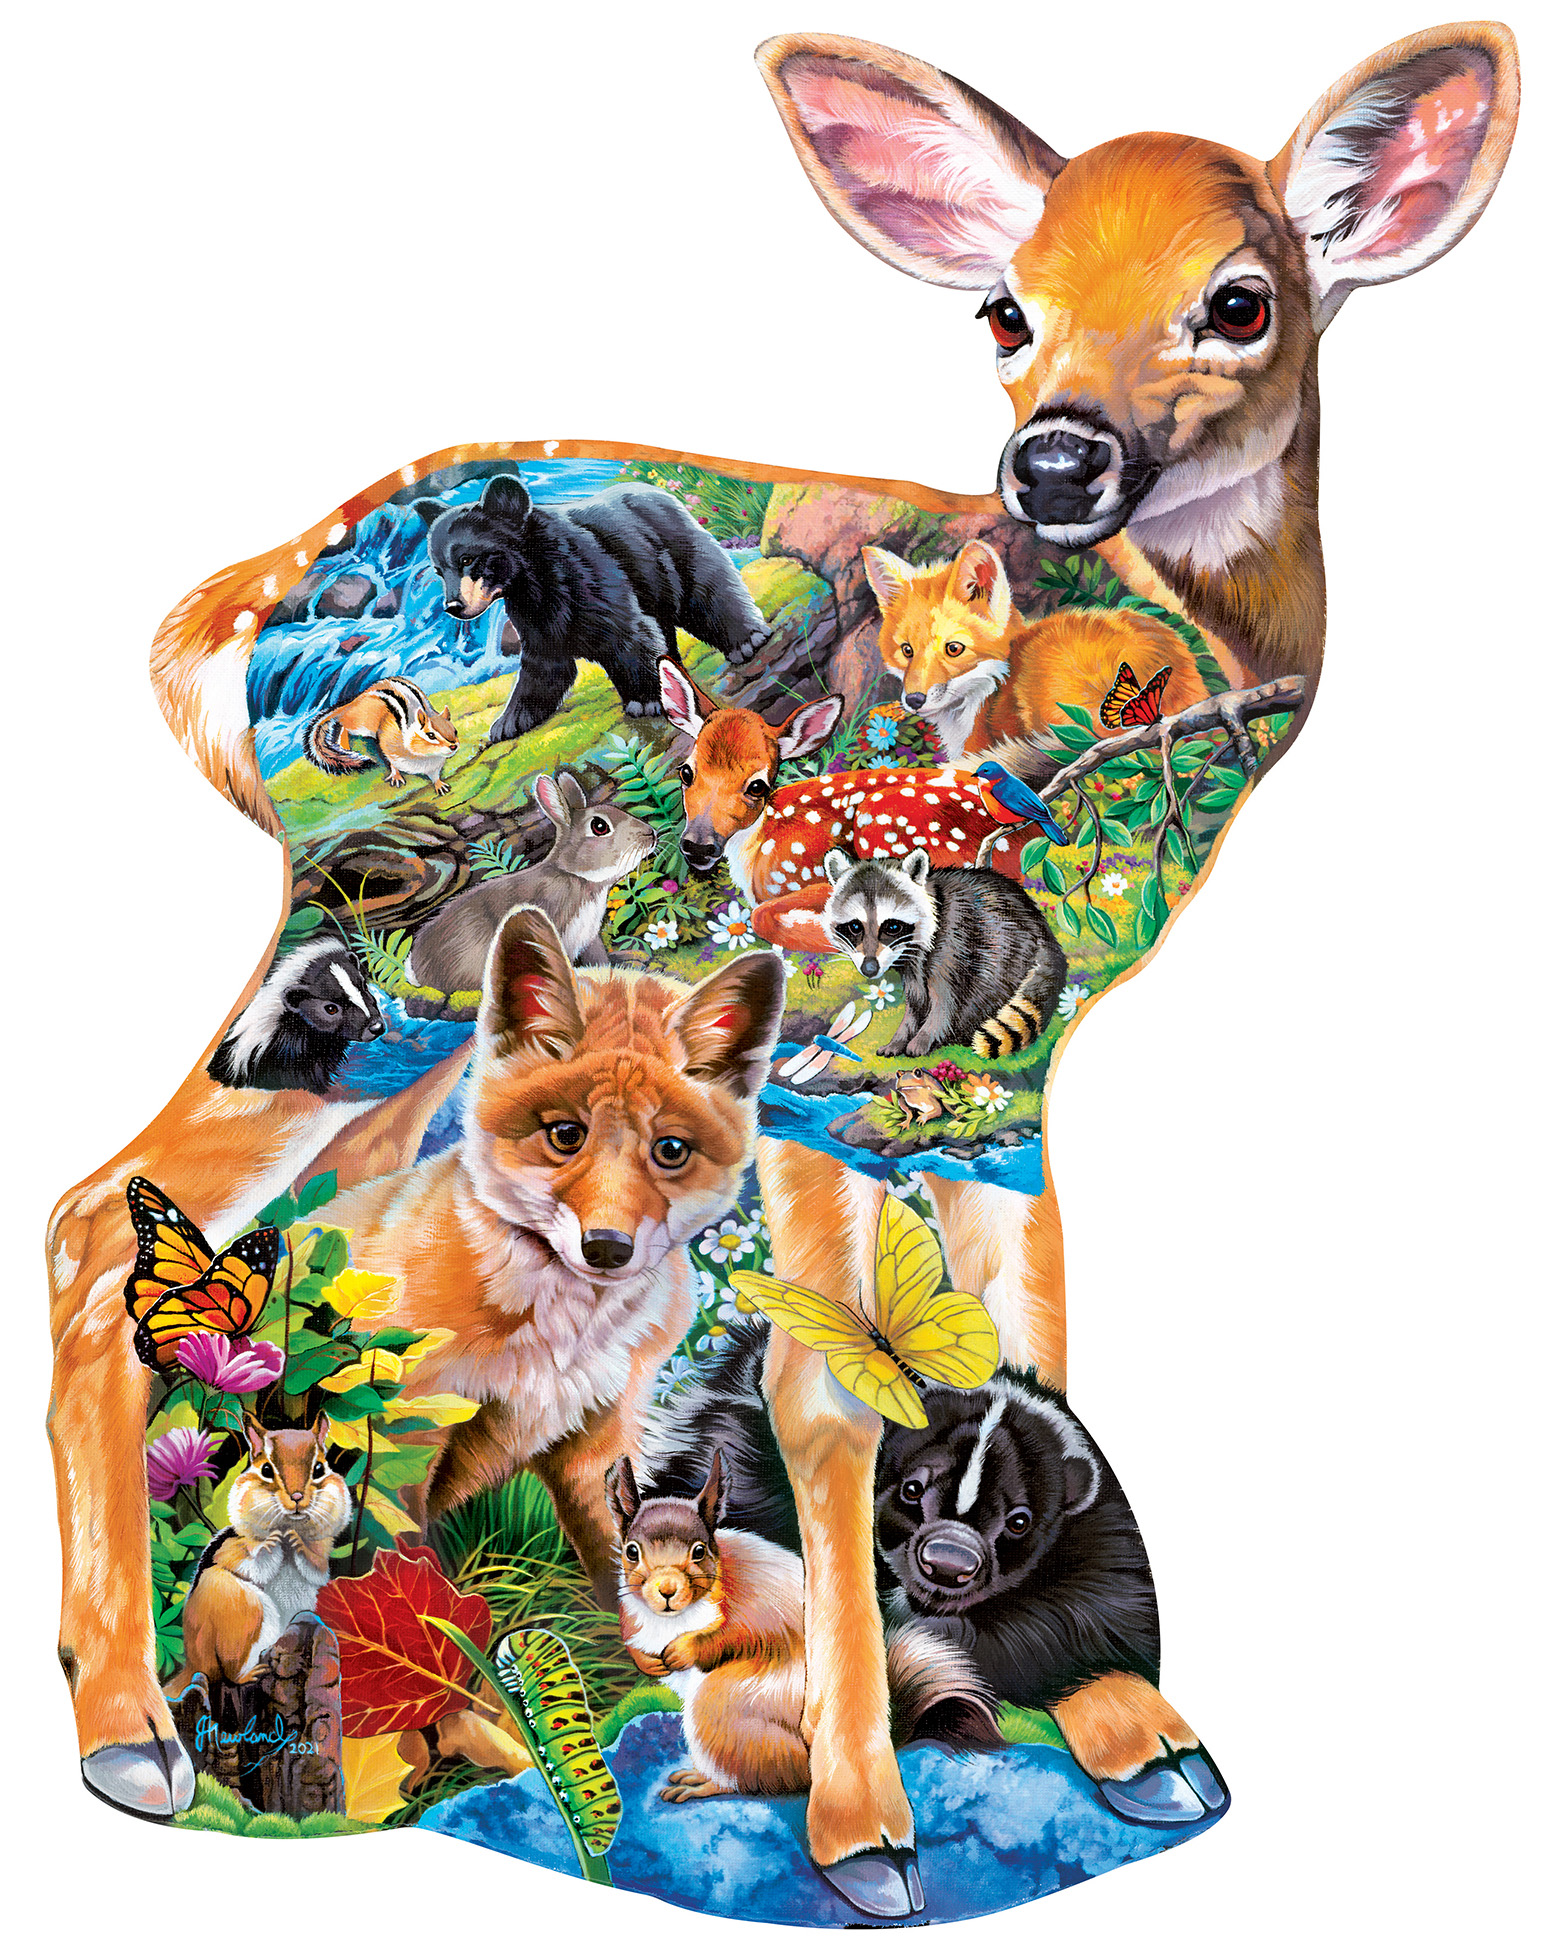 Fawn Friends Animals Shaped Puzzle